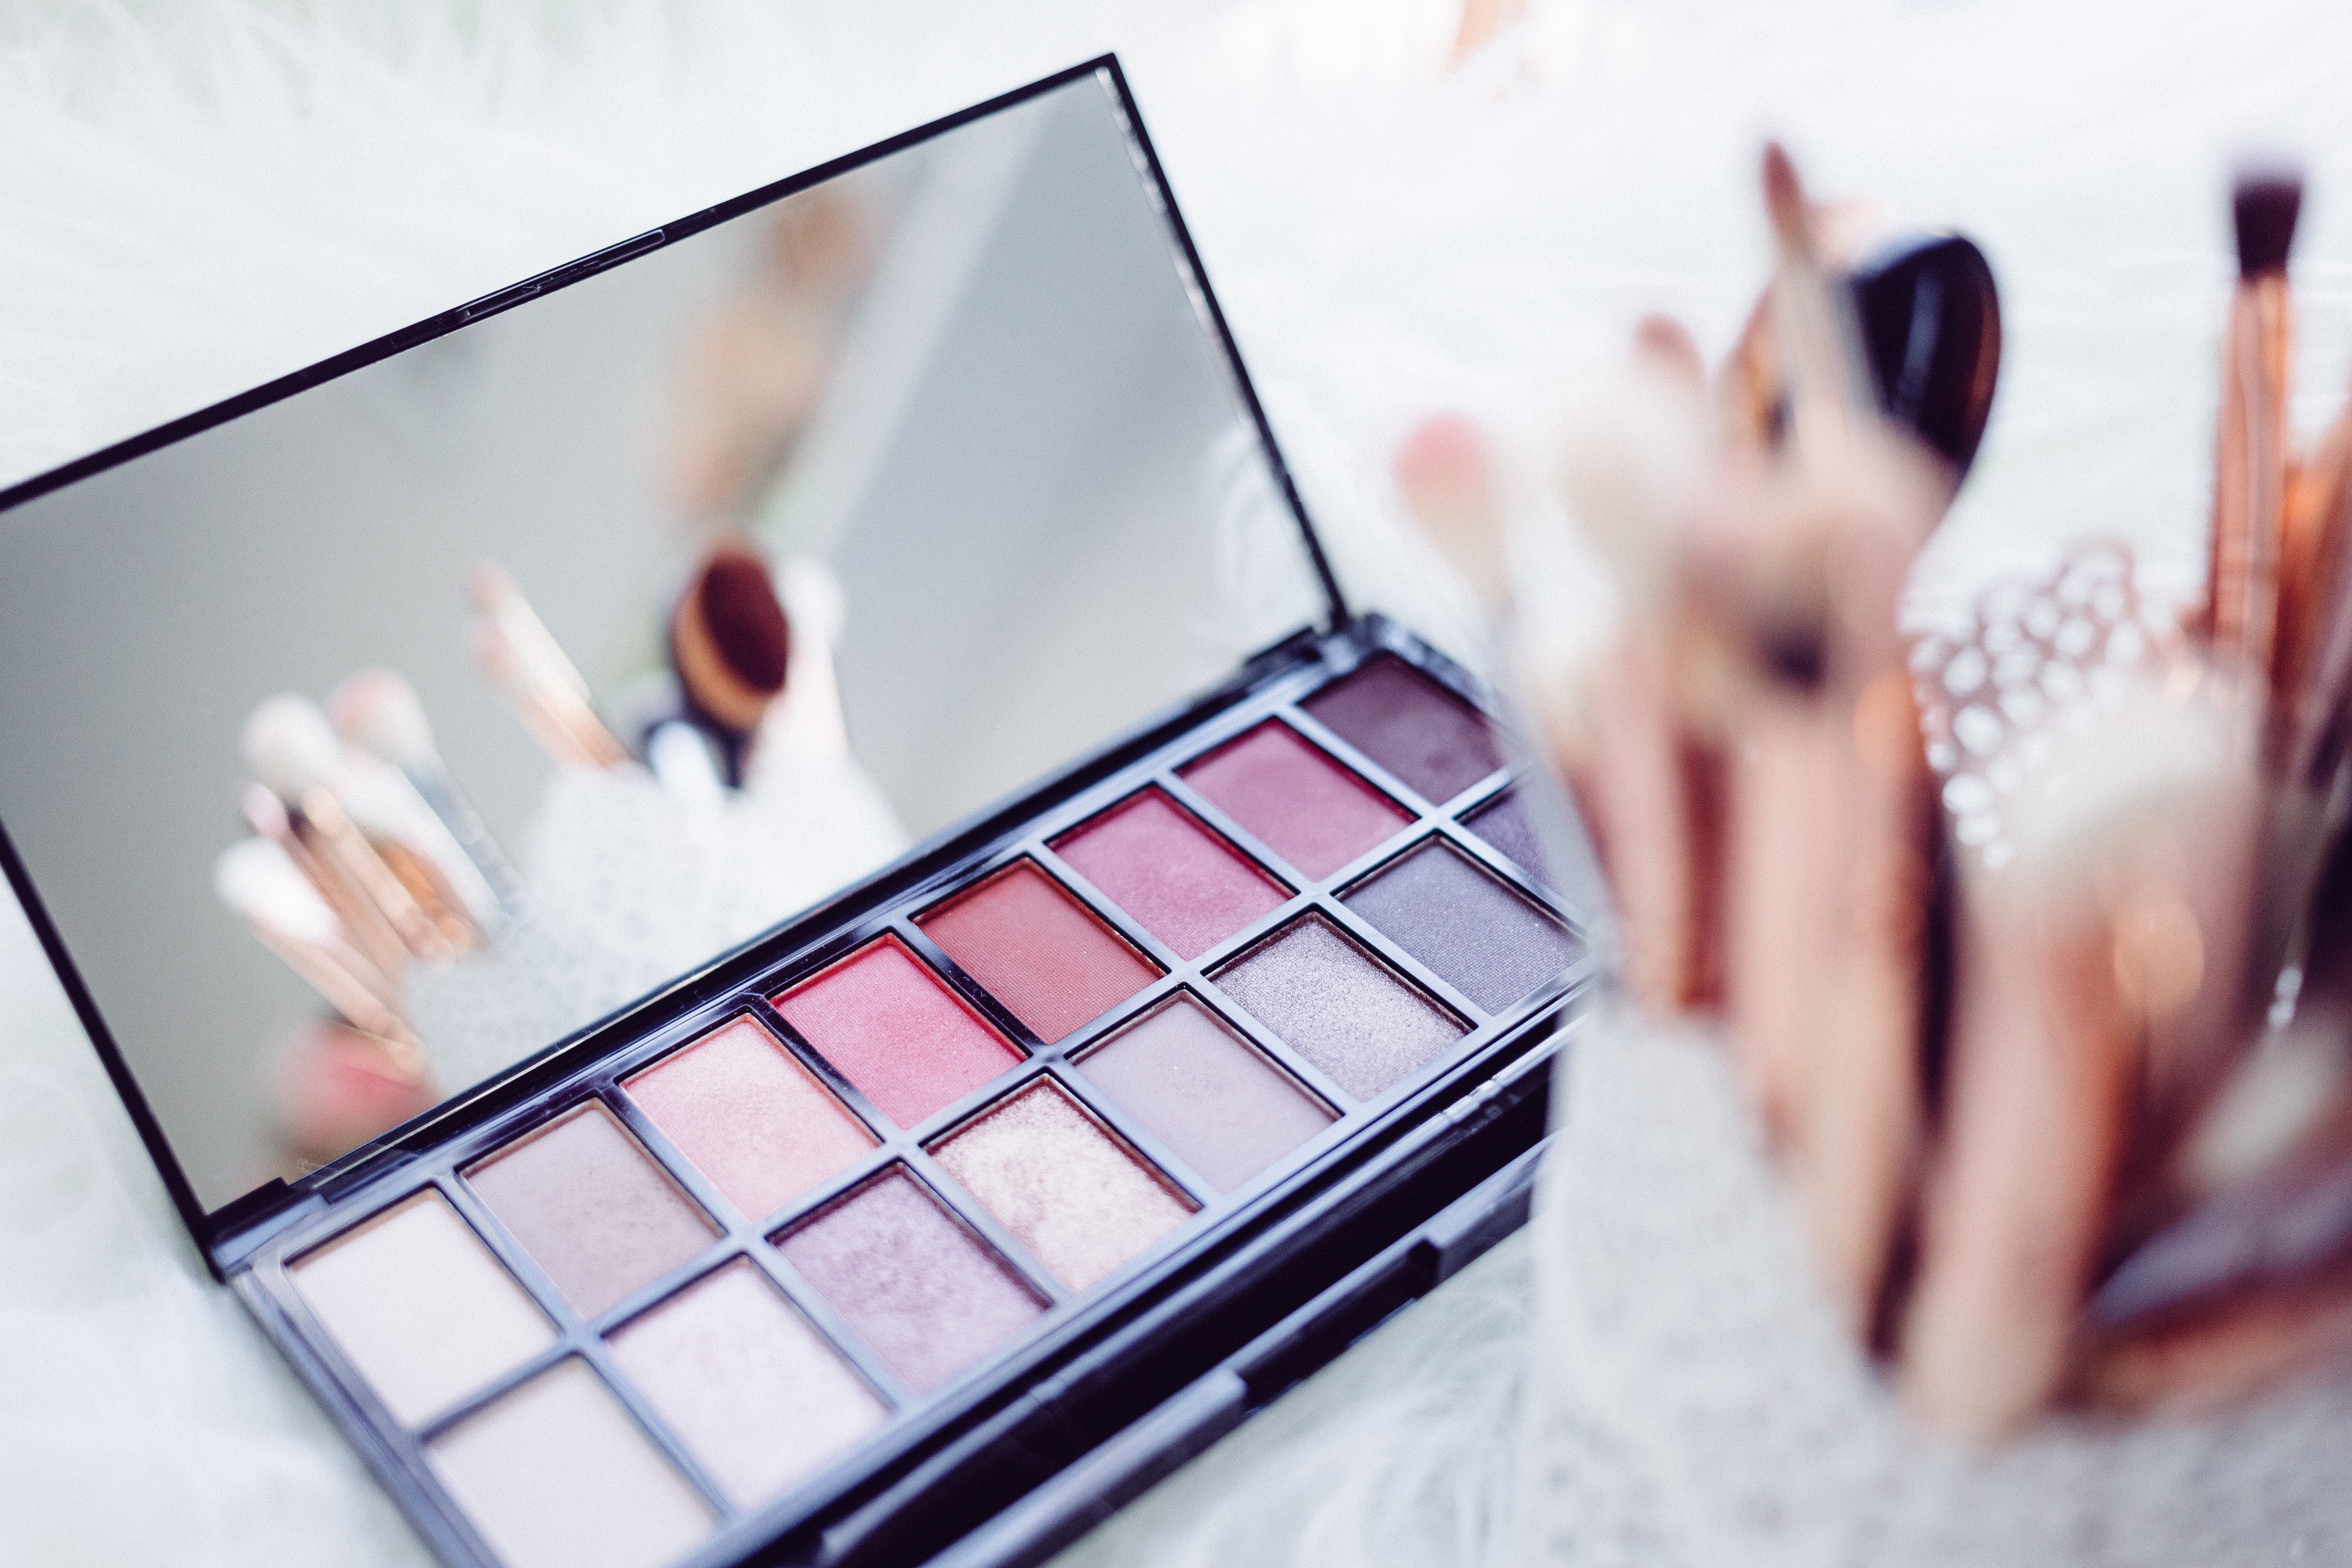 Find Hair And Makeup Artists in   Tuggeranong Get the best prices from 2,000+ of the most reviewed Hair And Makeup Artists  near Tuggeranong. Pick from mobile stylists or salons.